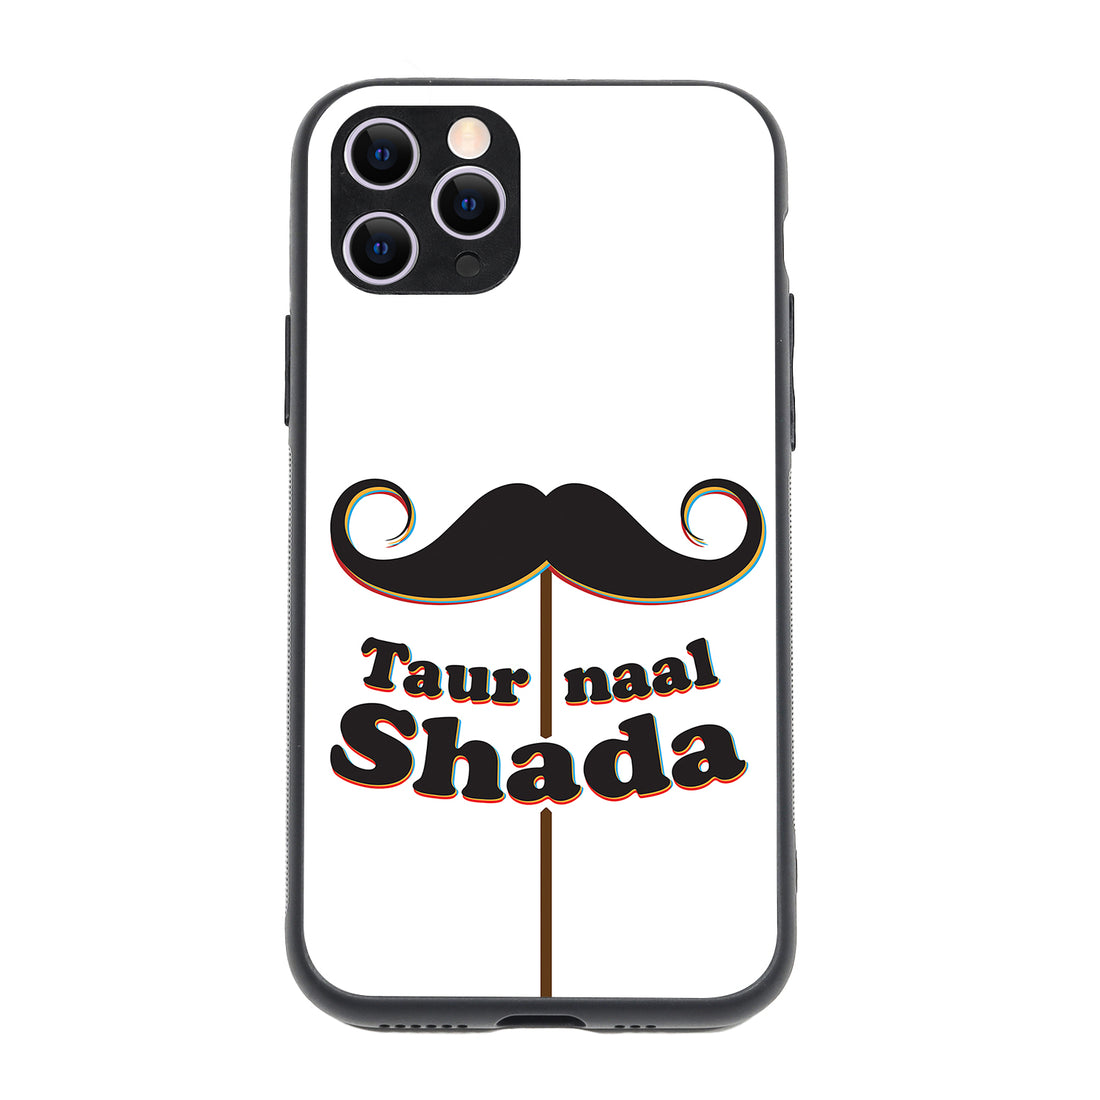 Taur Naal Shada Motivational Quotes iPhone 11 Pro Case